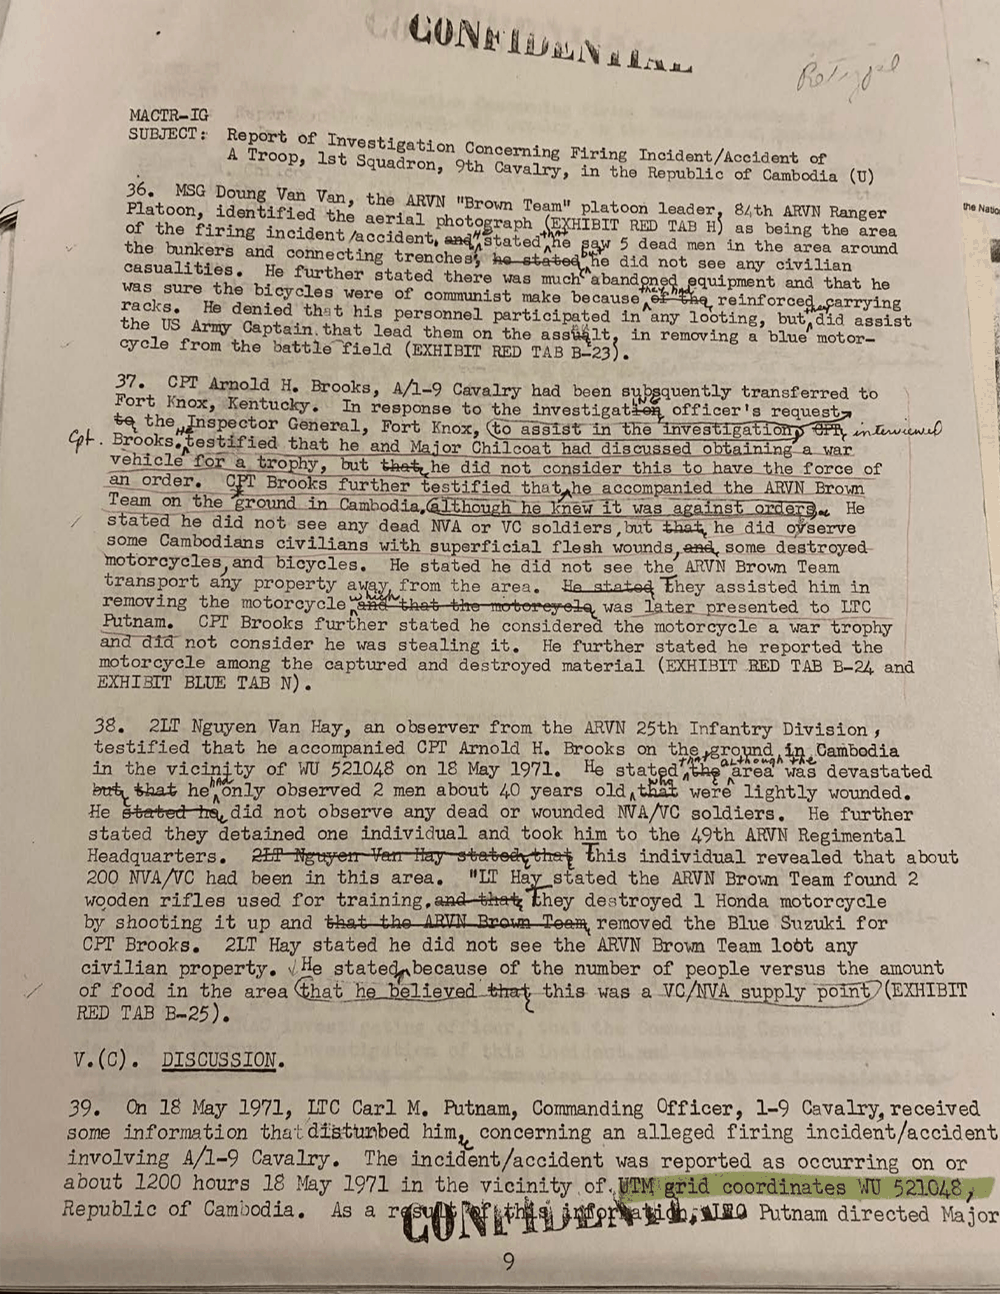 Page 29 from Excerpts-From-An-Exclusive-Archive-Of-US-Military-Documents-Compiled-by-The Intercept